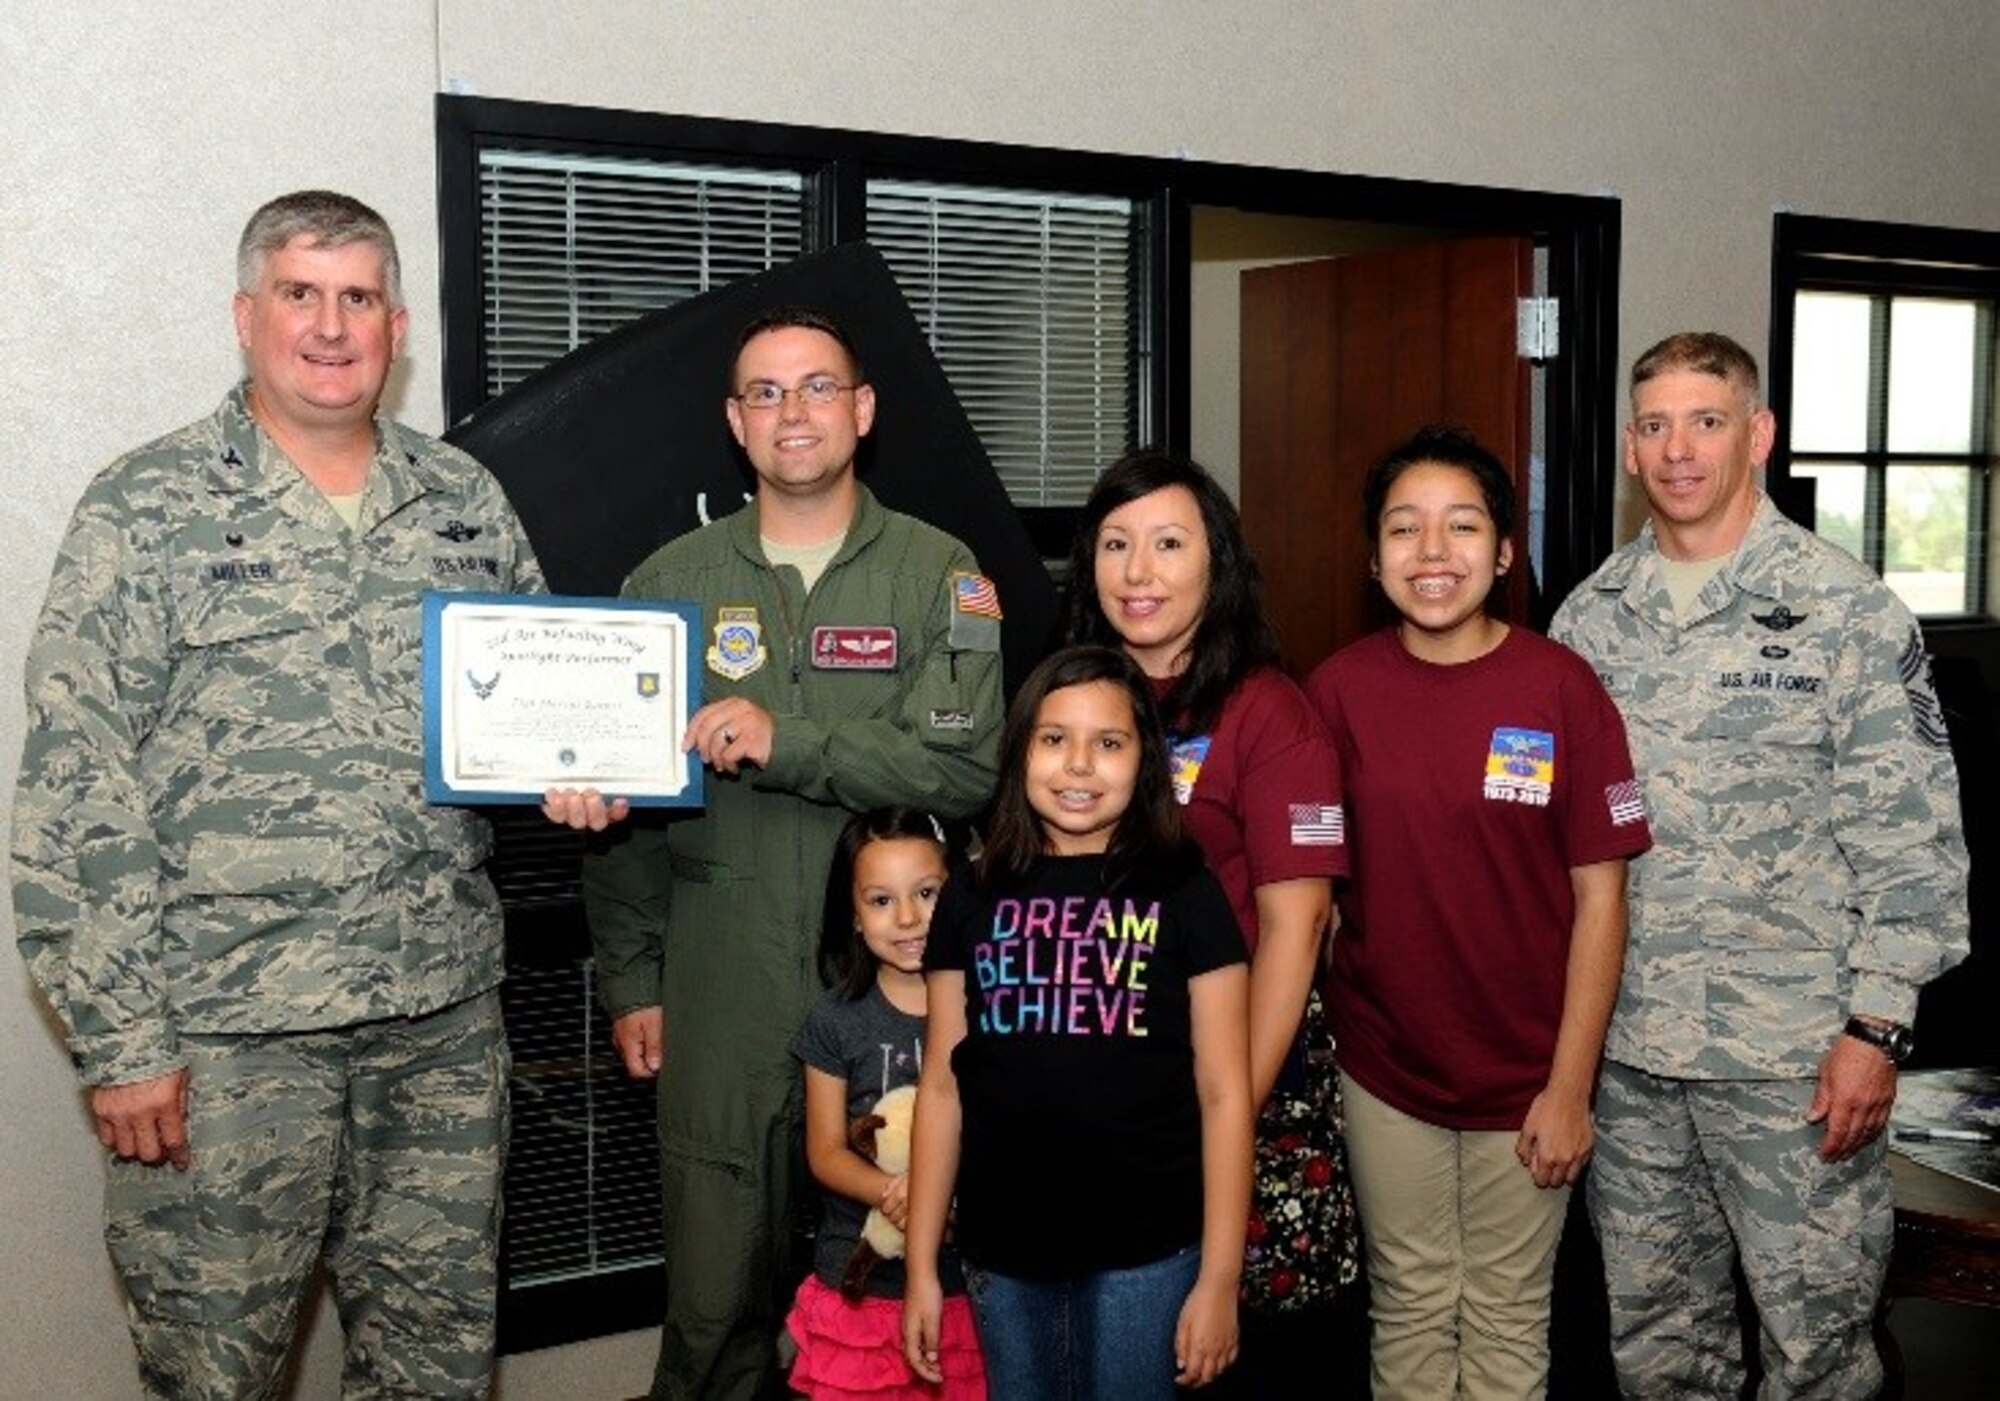 Tech. Sgt. Marcus Barnes, 384th Air Refueling Squadron operations superintendent, poses with Col. Albert Miller, 22nd Air Refueling Wing commander, Chief Master Sgt. Shawn Hughes, 22nd ARW command chief, and his family, July 26, 2016, at McConnell Air Force Base, Kan. Barnes received the spotlight performer for the week of June 20 - 24. (U.S. Air Force photo/Senior Airman David Bernal Del Agua)